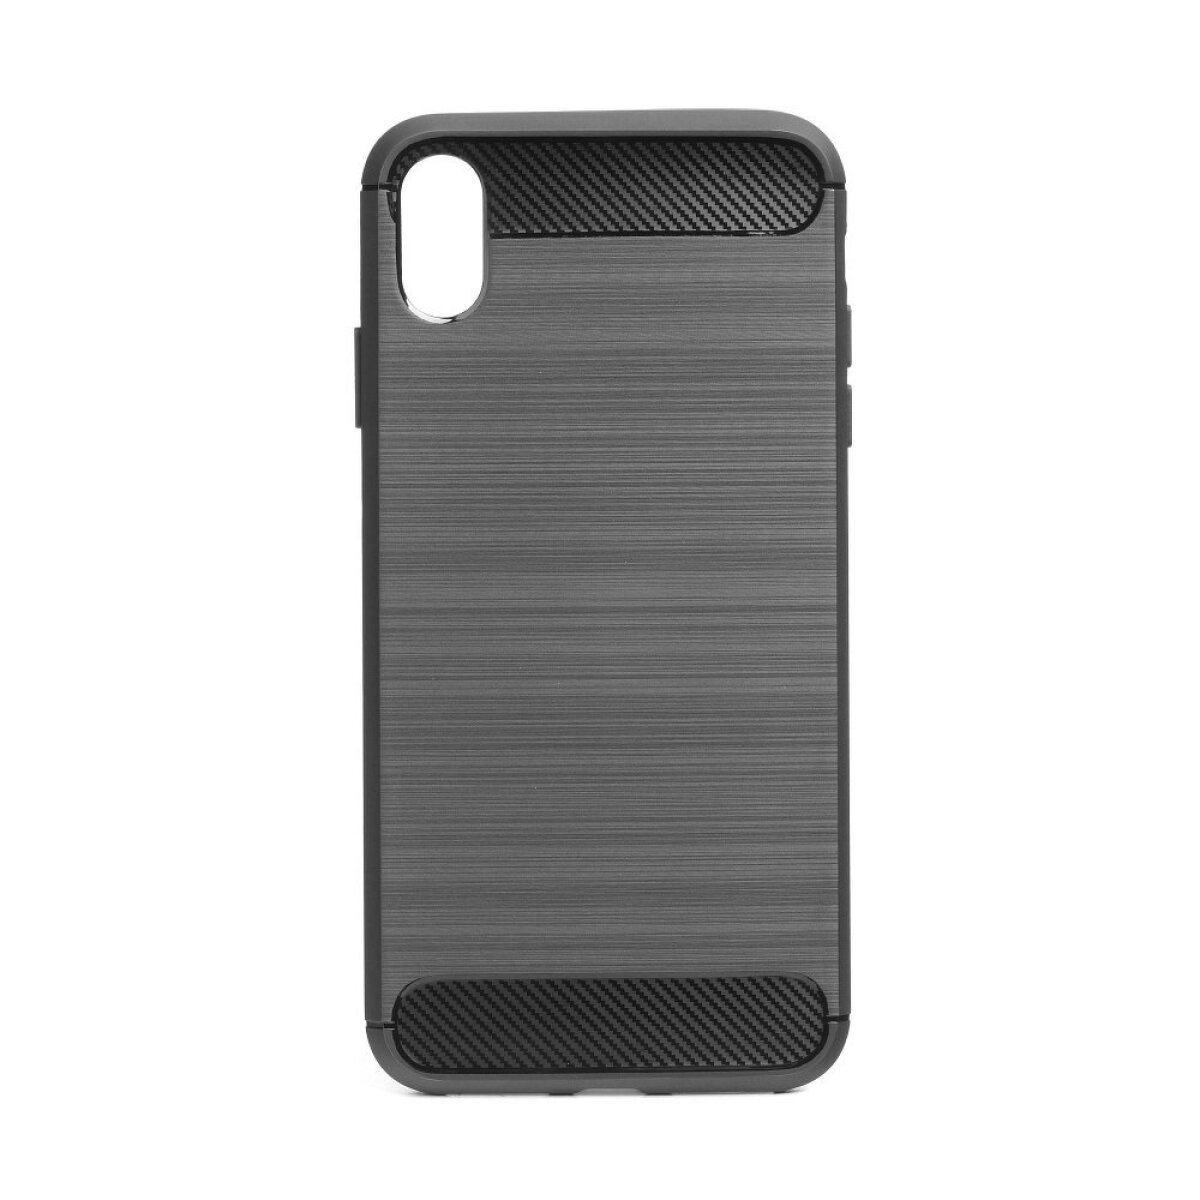 FORCELL CARBON iPhone Pro 11 Cover, Schwarz schwarz, Full iPhone Apple, Max, Pro 11 Max